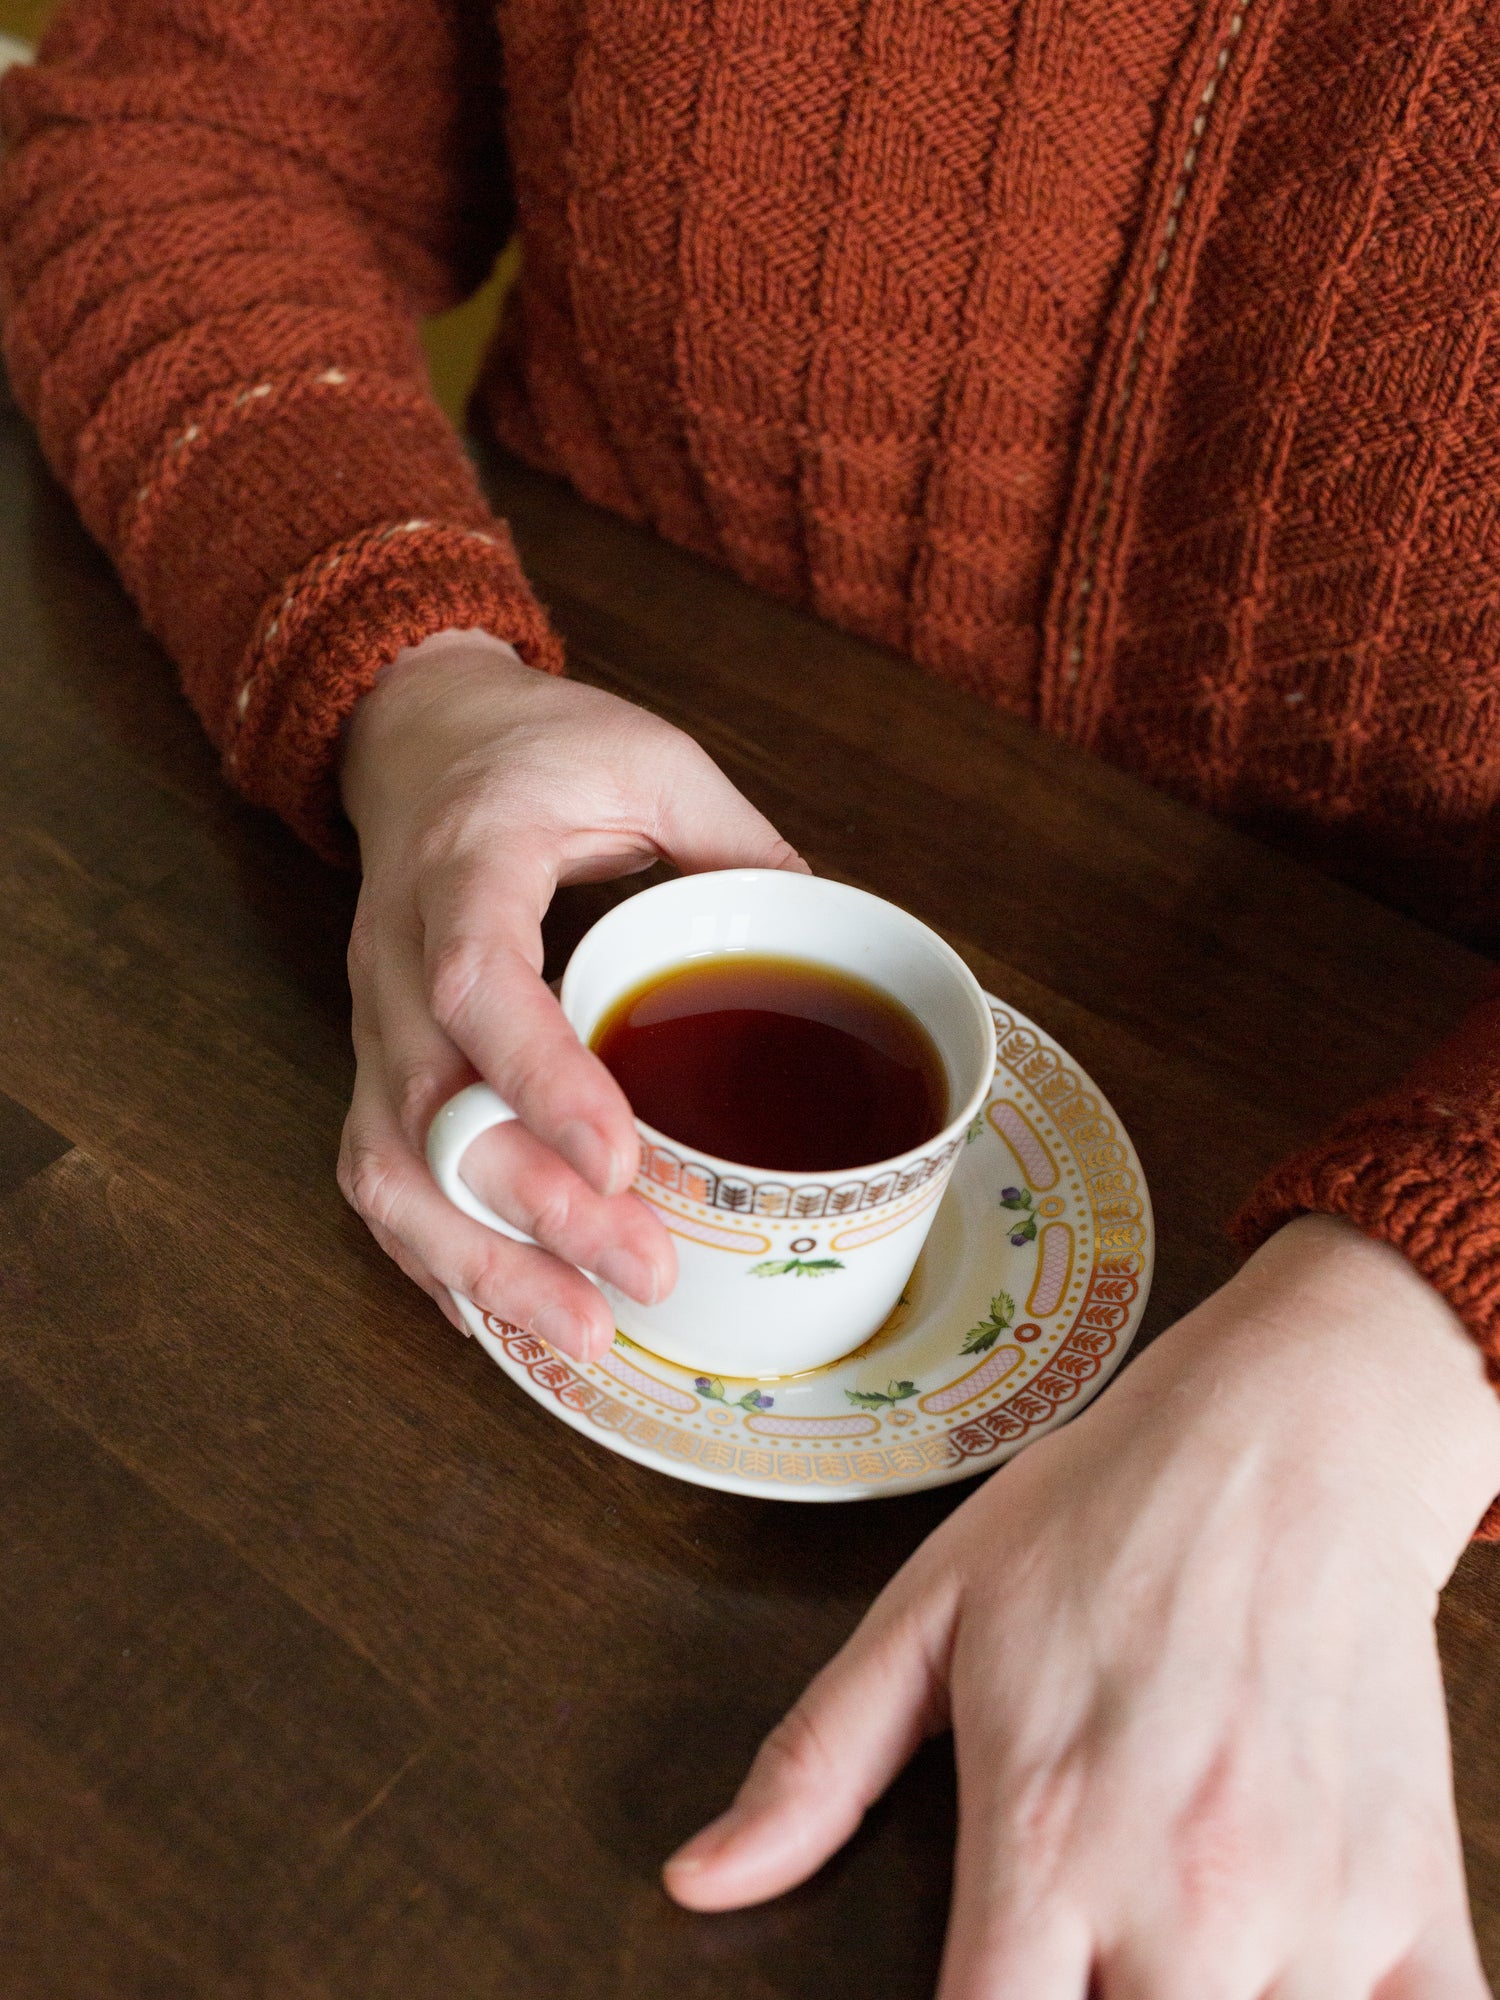 Jen's hand holds a teacup and saucer. She wears her Maker's Tunic, a brick red handknit sweater.